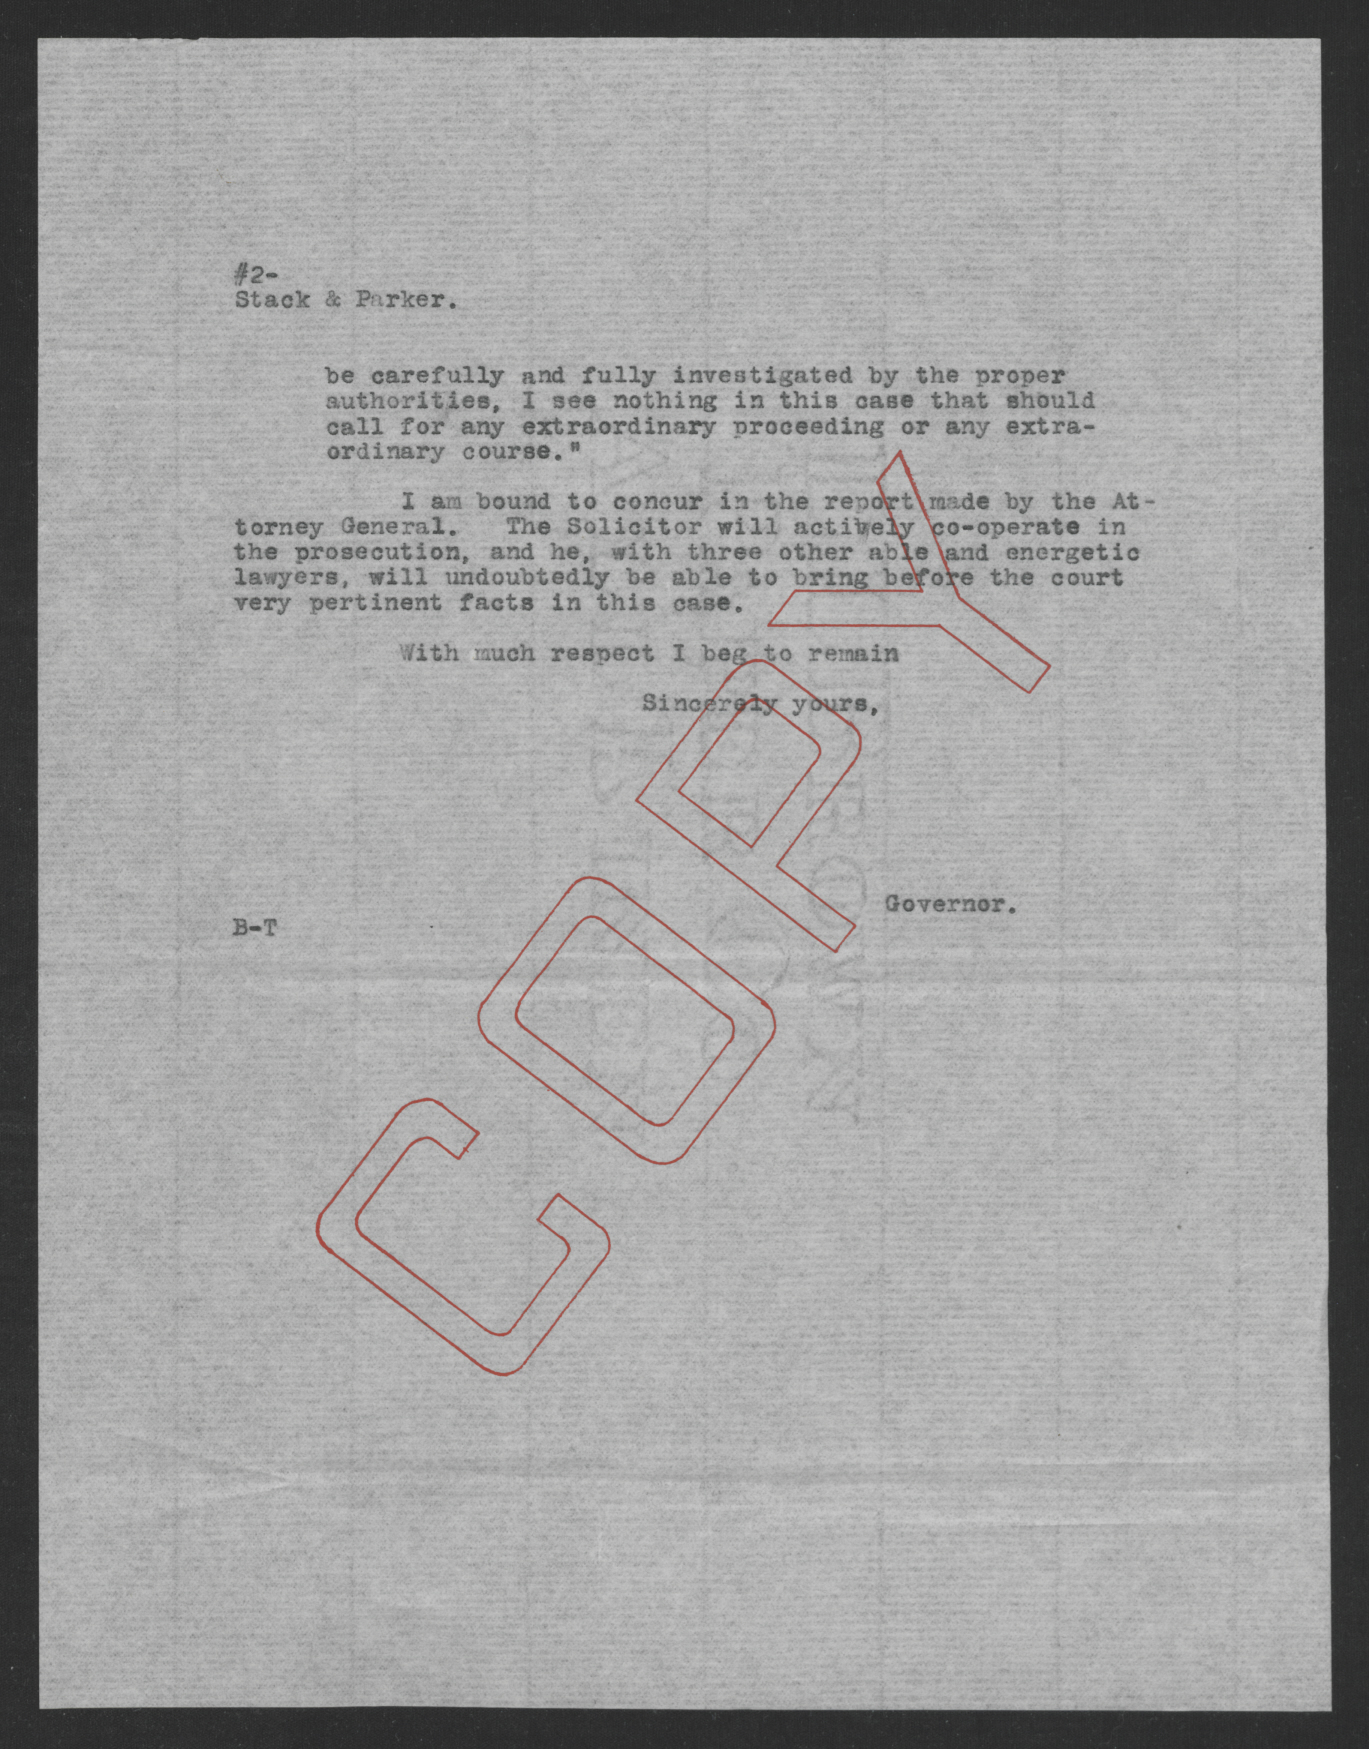 Letter from Thomas W. Bickett to Amos M. Stack and John J. Parker, October 27, 1919, page 2